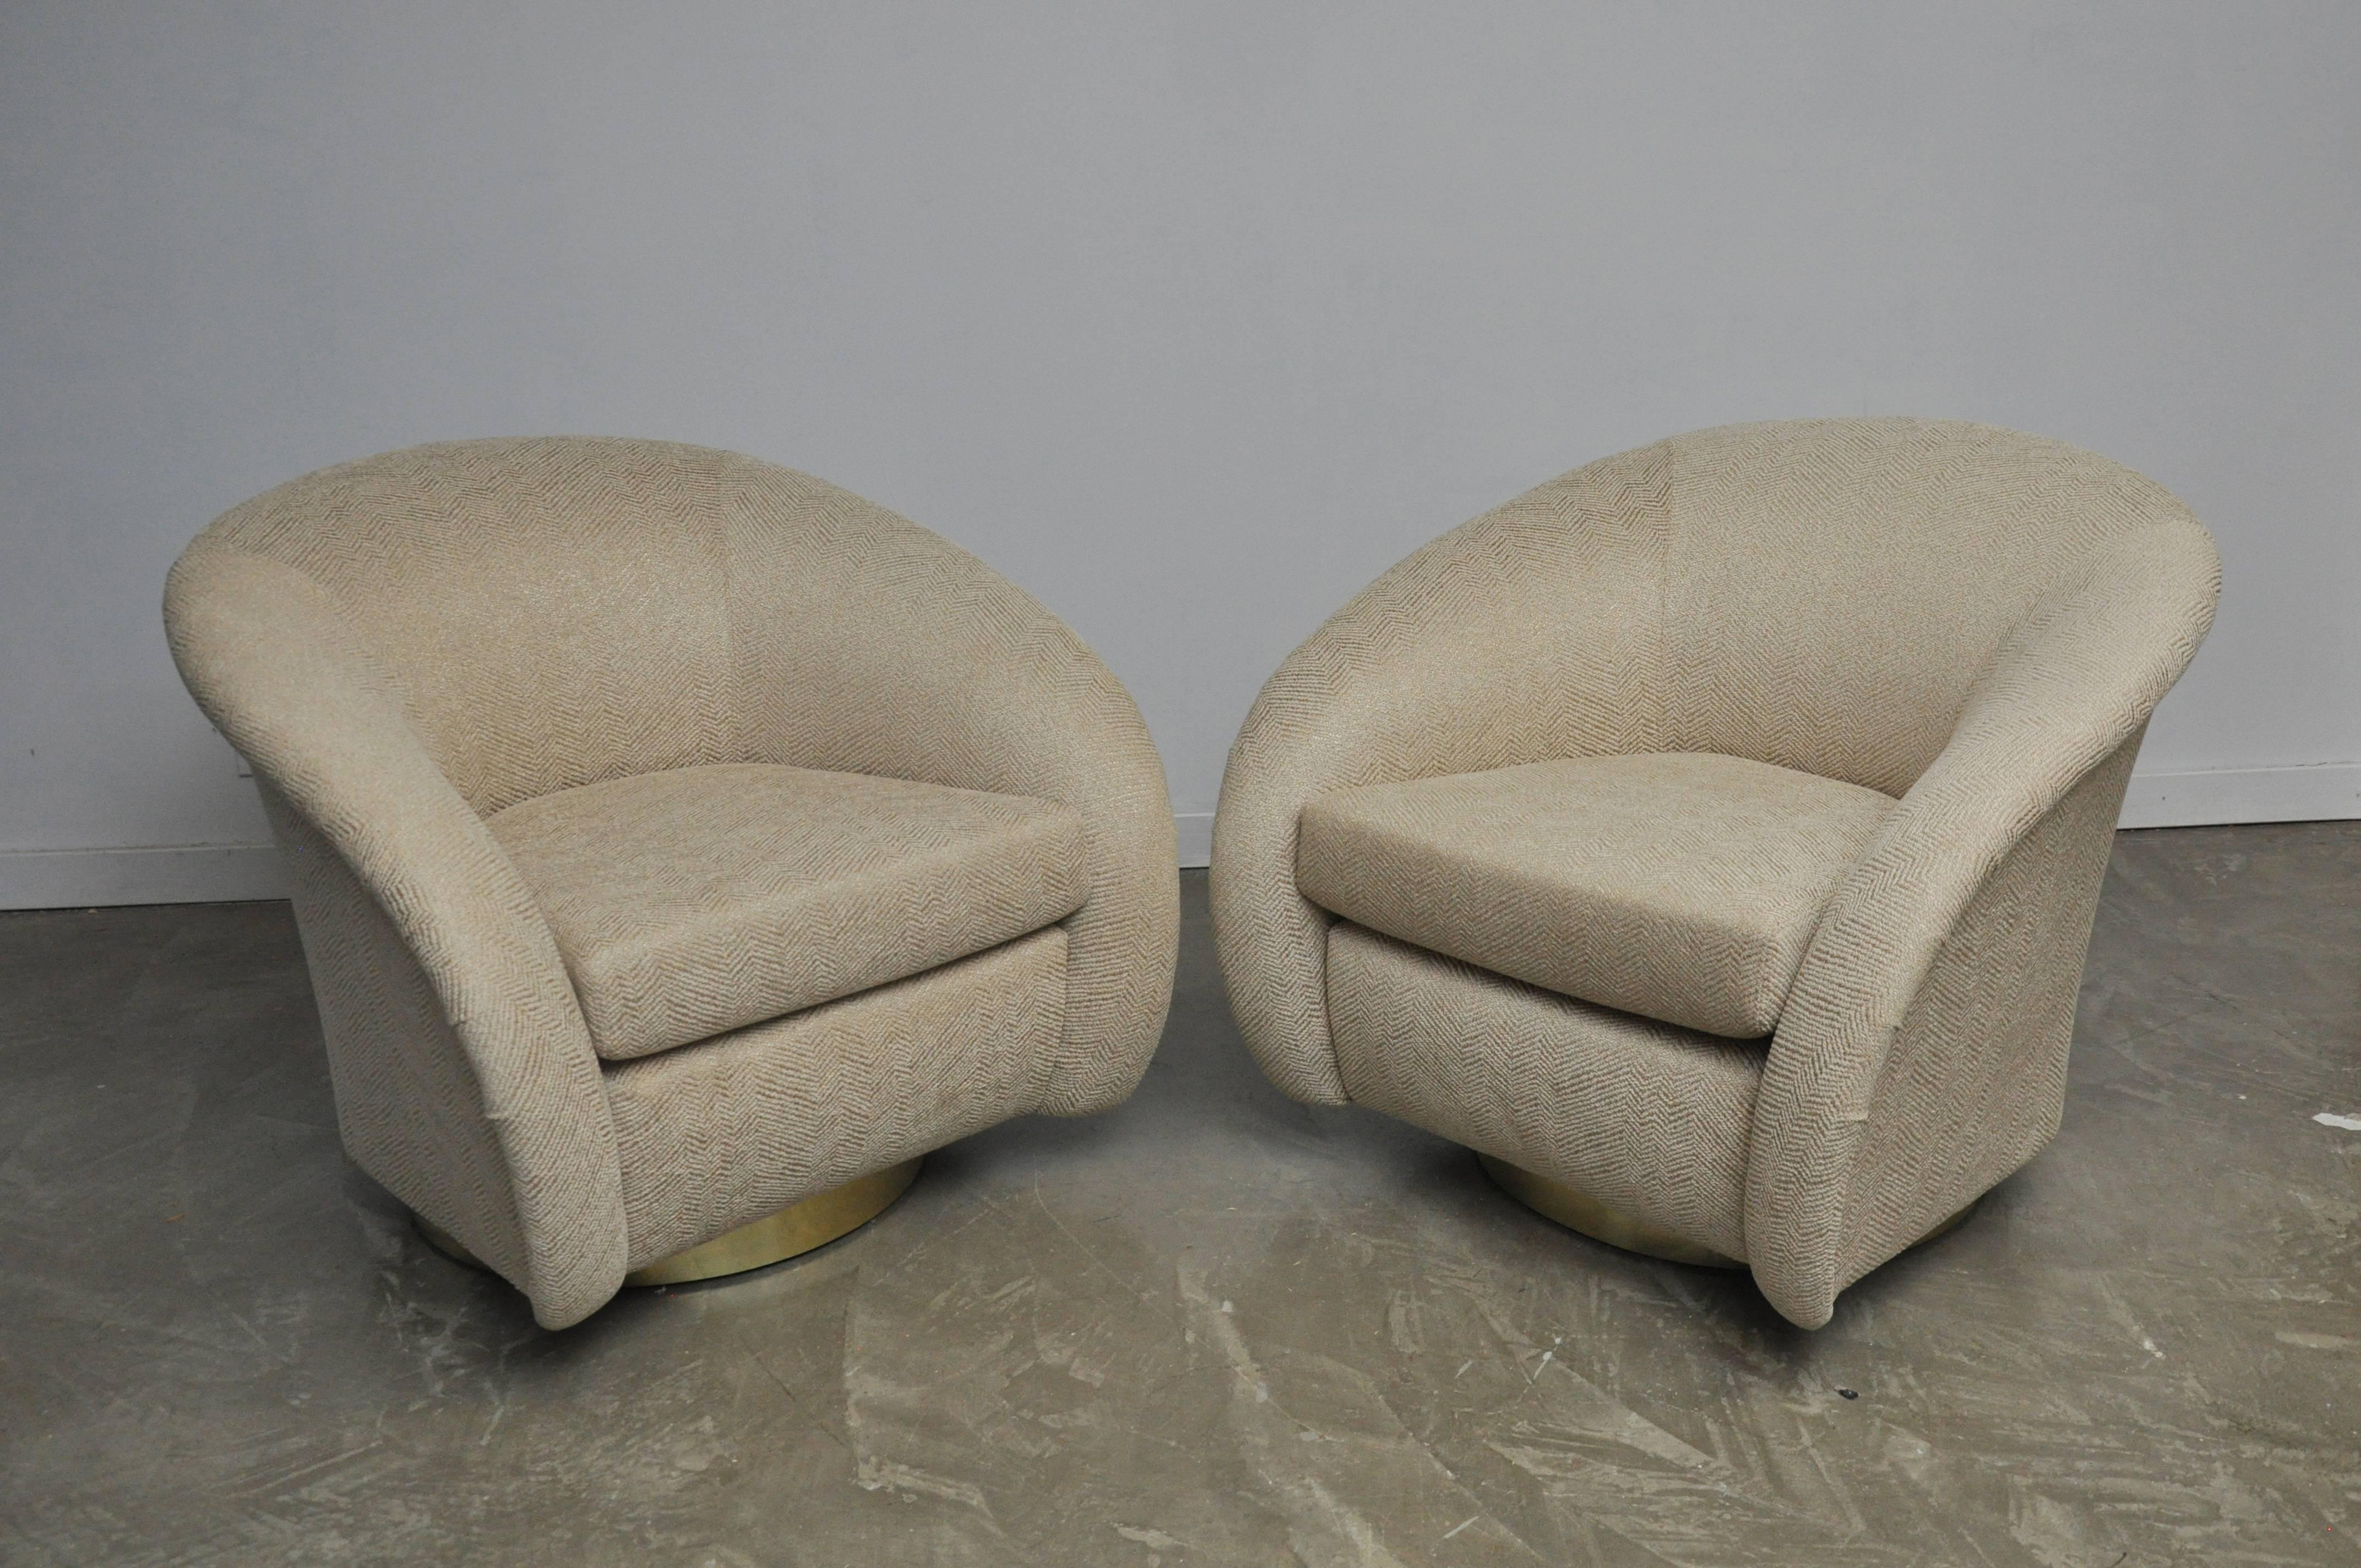 Swivel chairs with brass bases by Milo Baughman for Directional Furniture.  Fully restored and reupholstered.